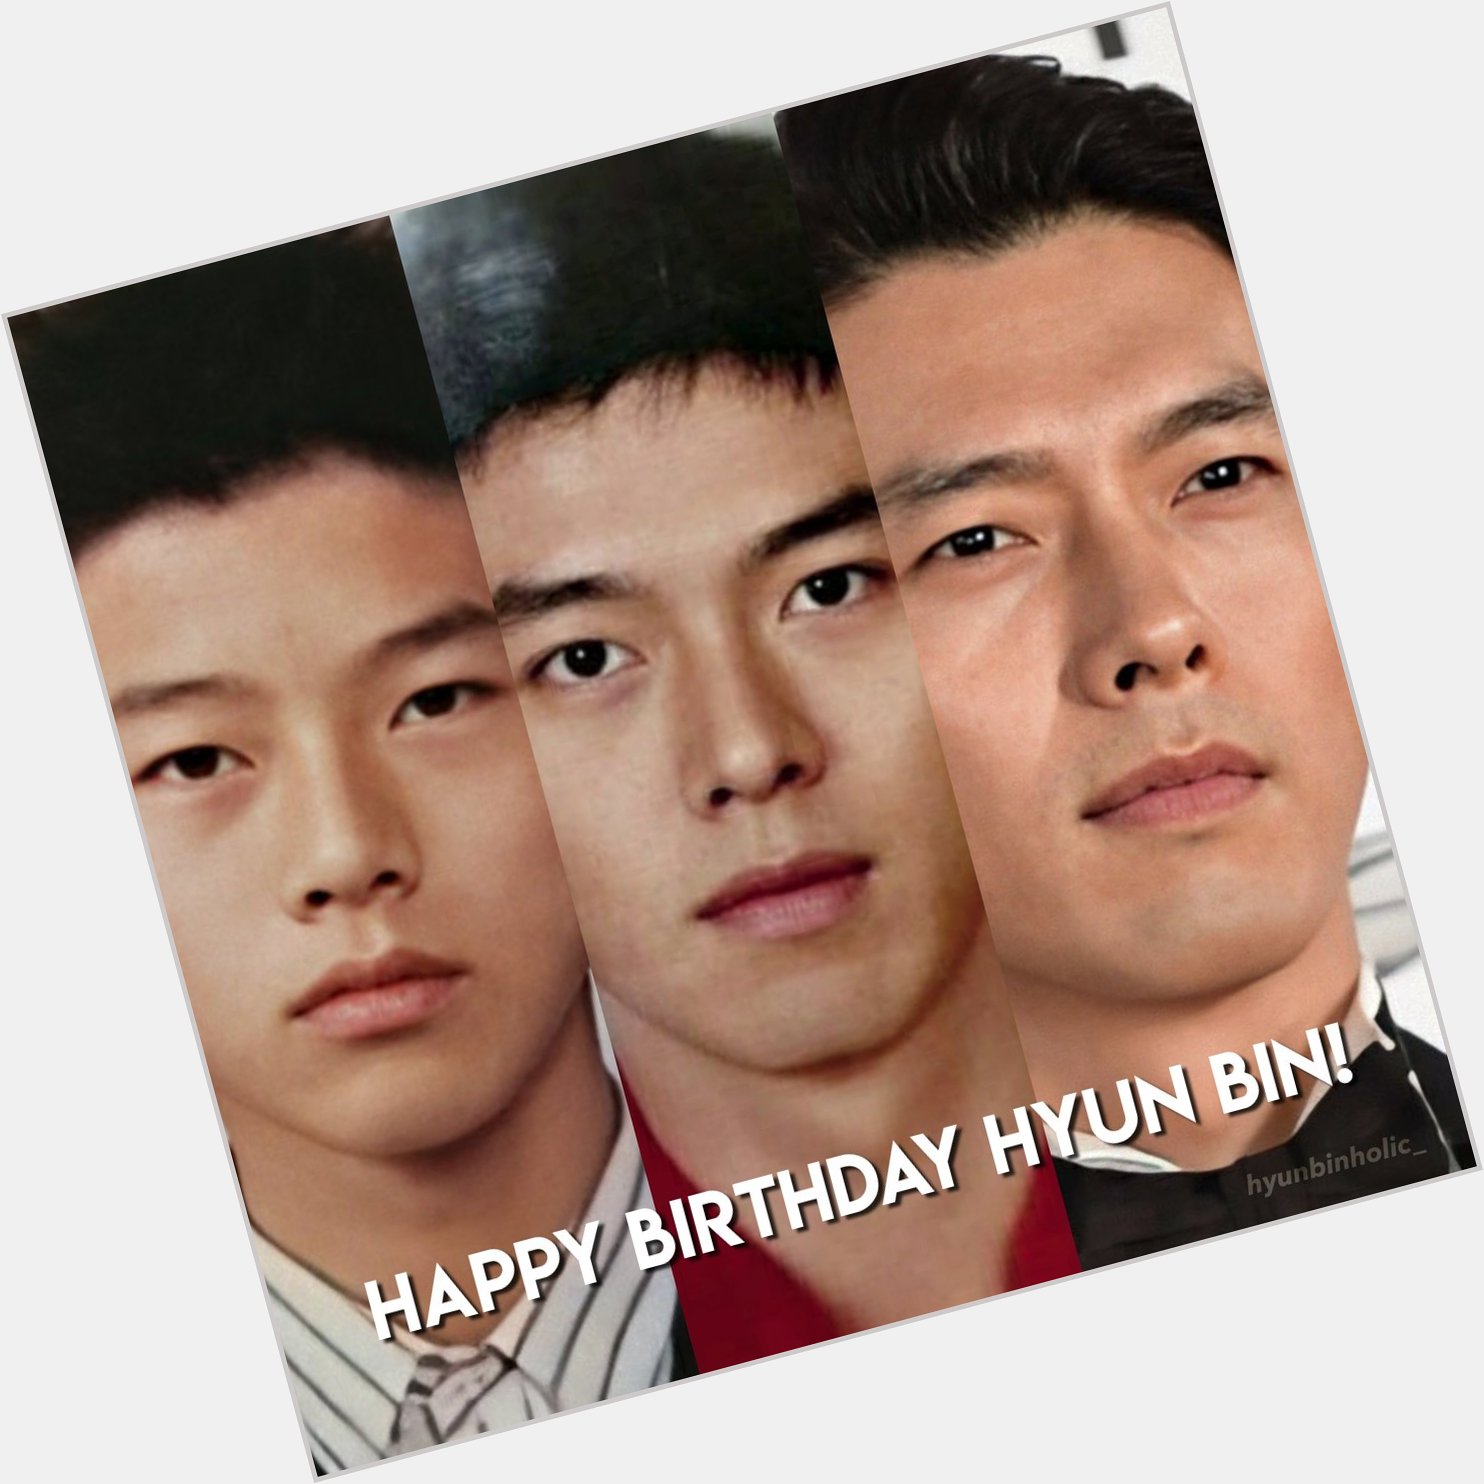 Happy birthday Hyun Bin! Wishing you nothing but the best!    [CrPic: owner]  